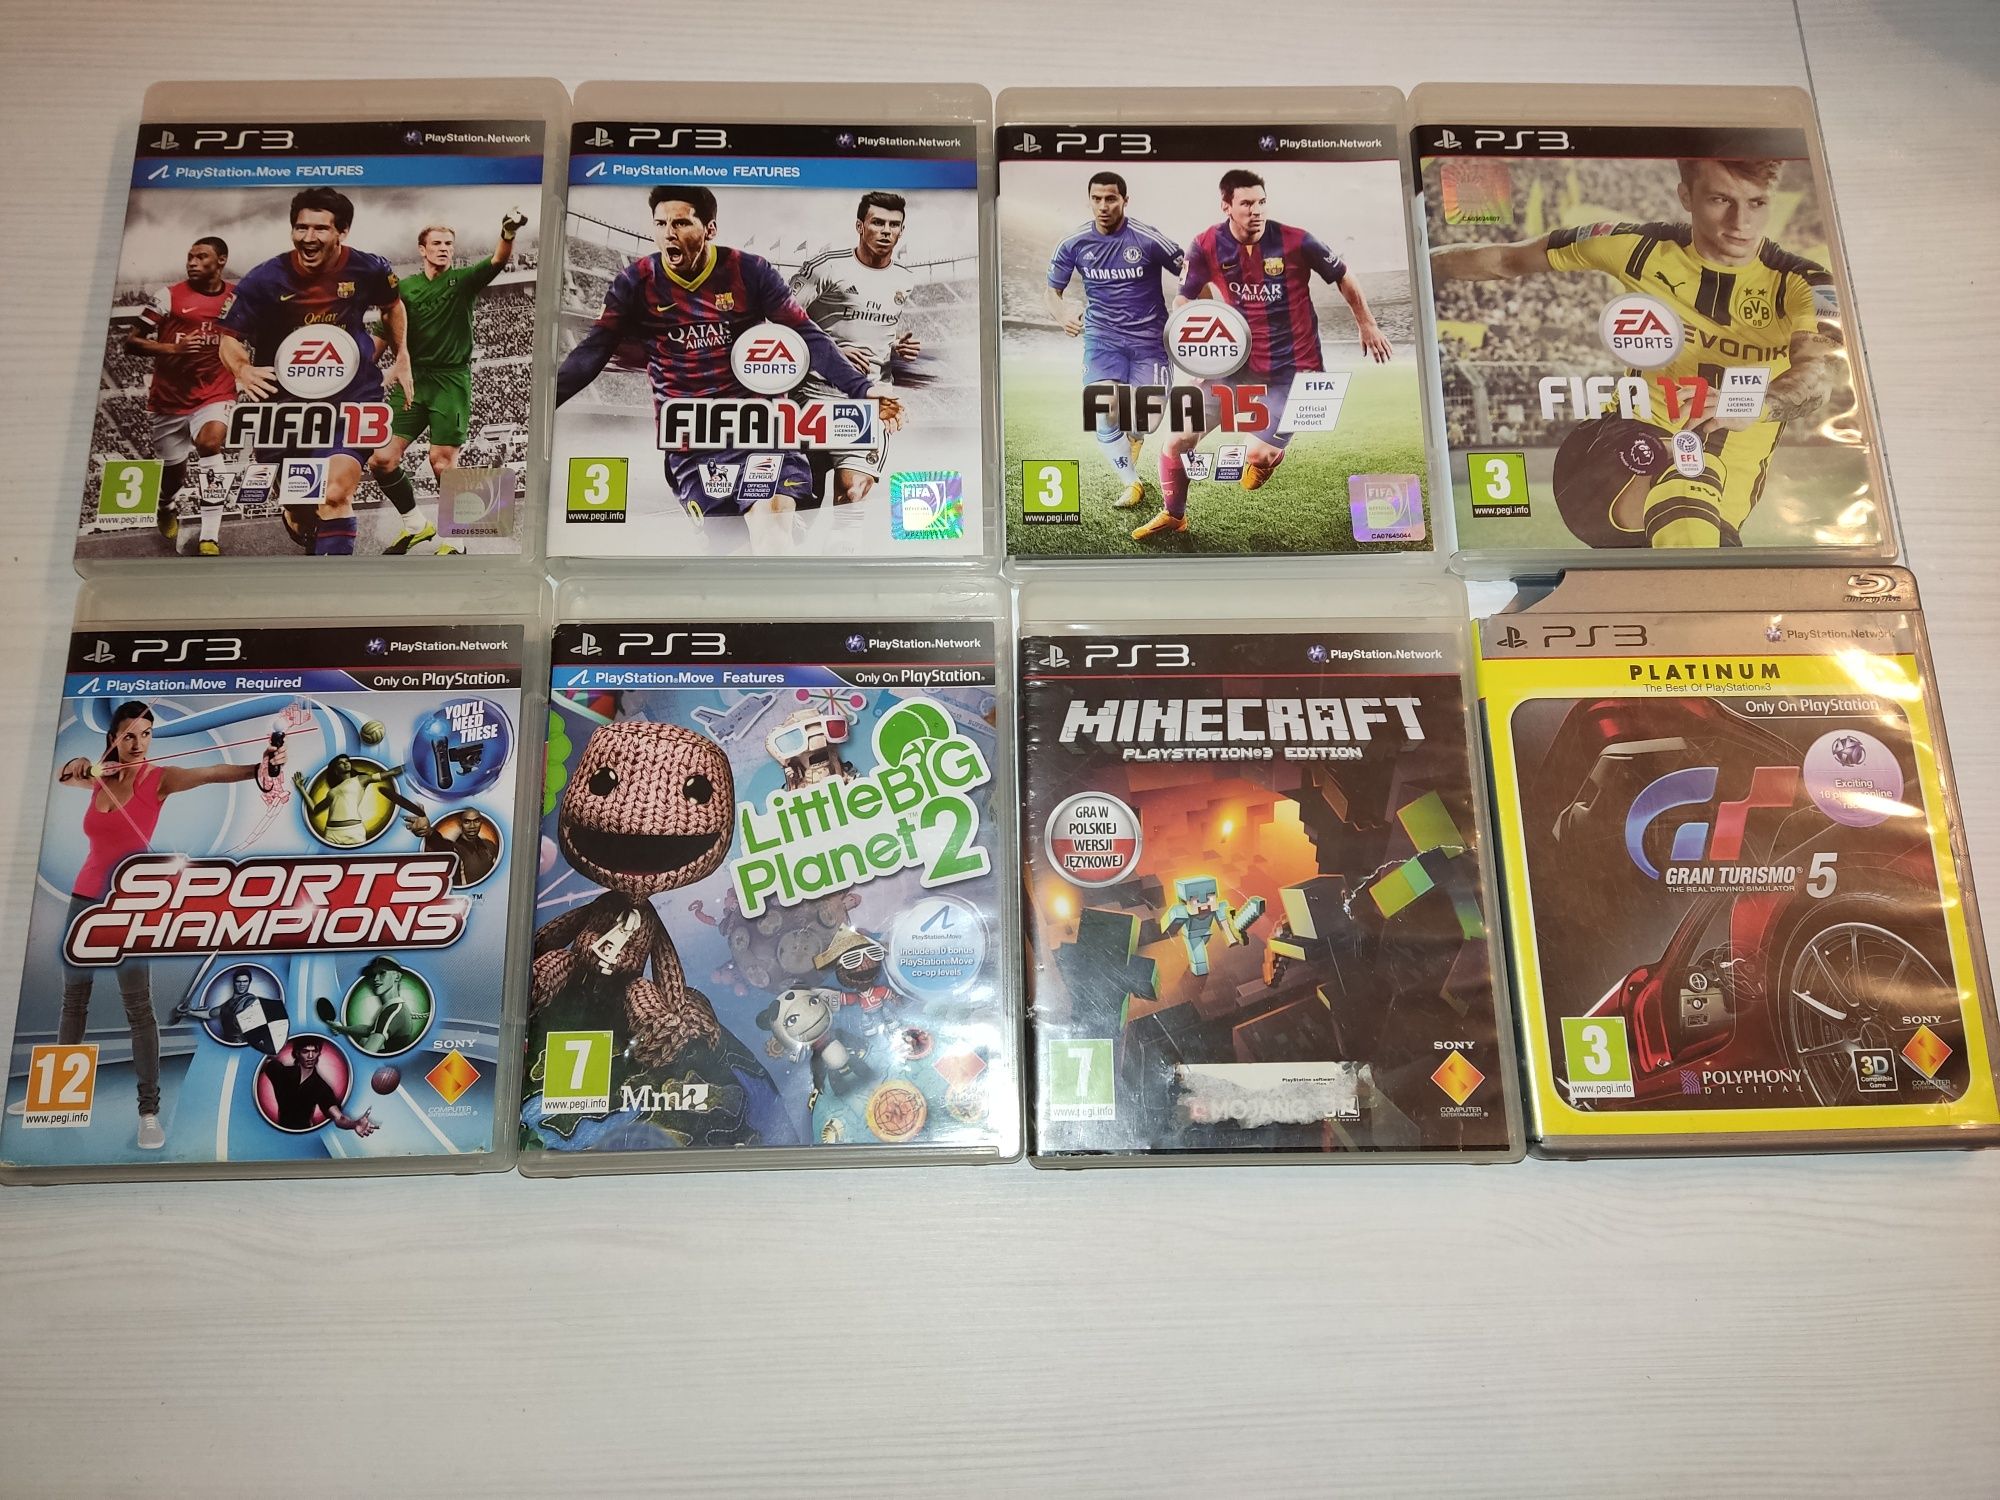 Gry na PS3 Minecraft, littlebigplanet 2, fifa. PlayStation 3